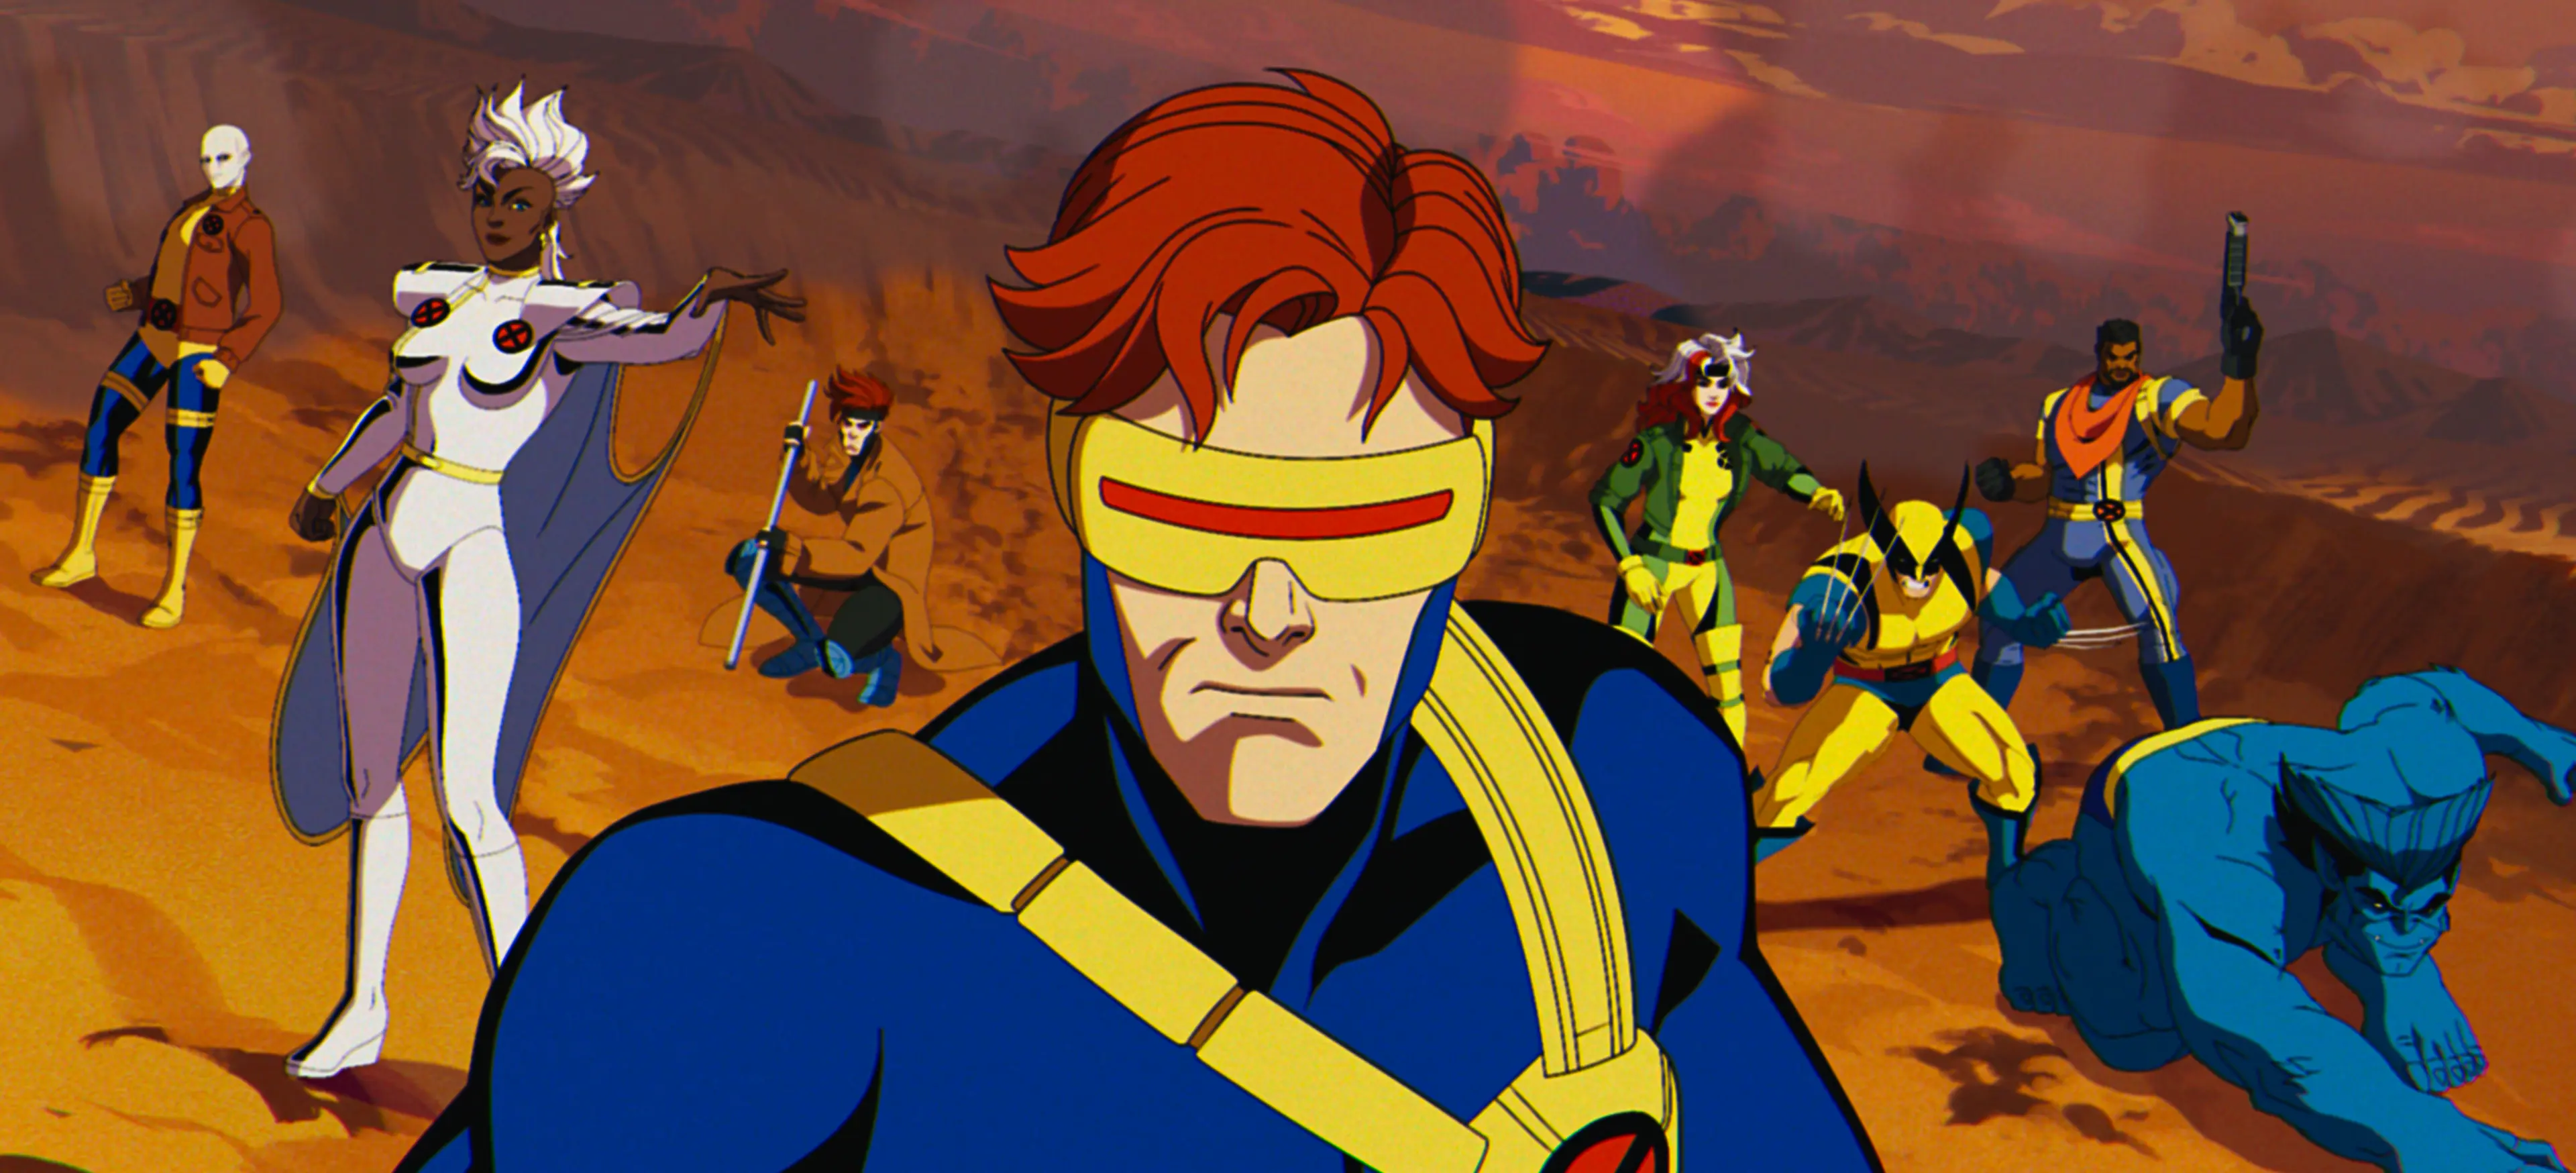 X-Men '97 Review: A Worthy Sequel to the Animated Series